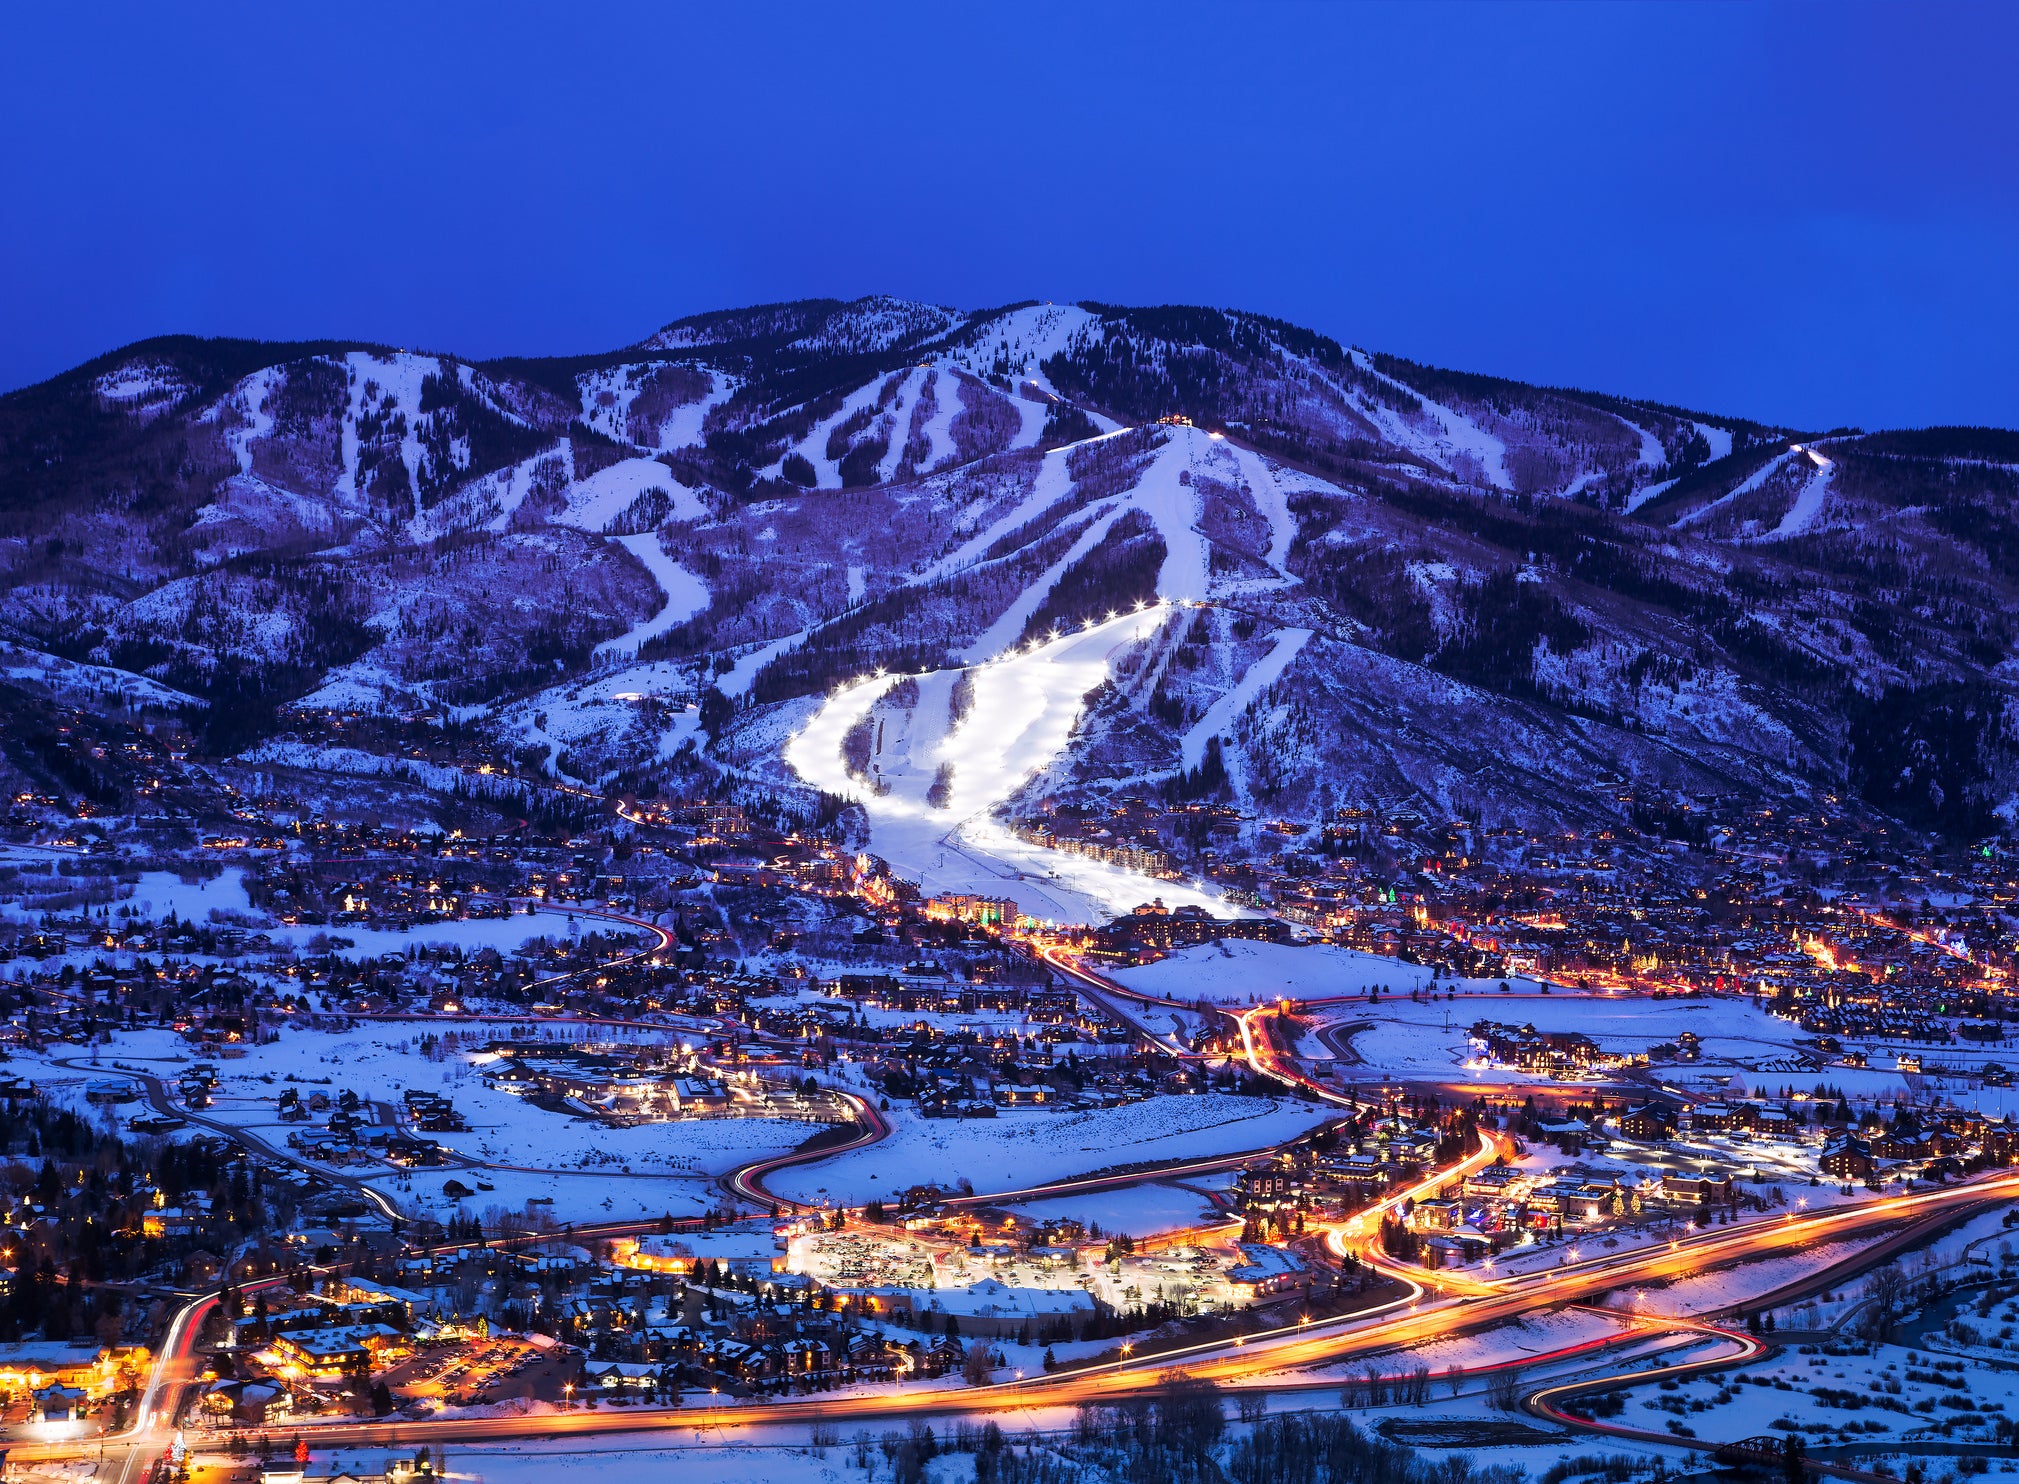 Steamboat Springs mountain